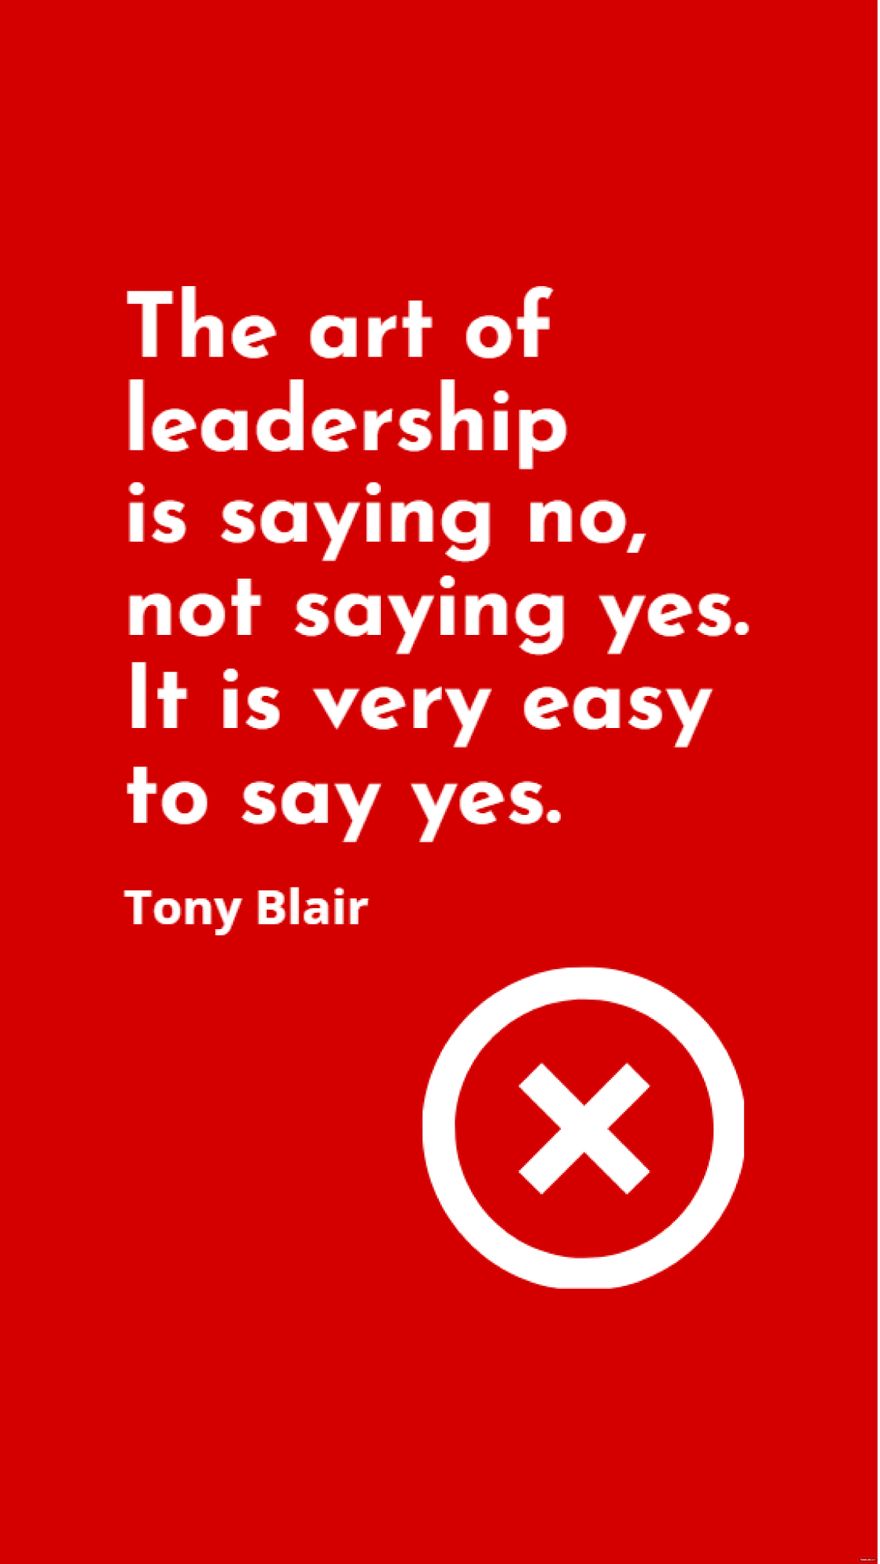 Tony Blair - The art of leadership is saying no, not saying yes. It is very easy to say yes.